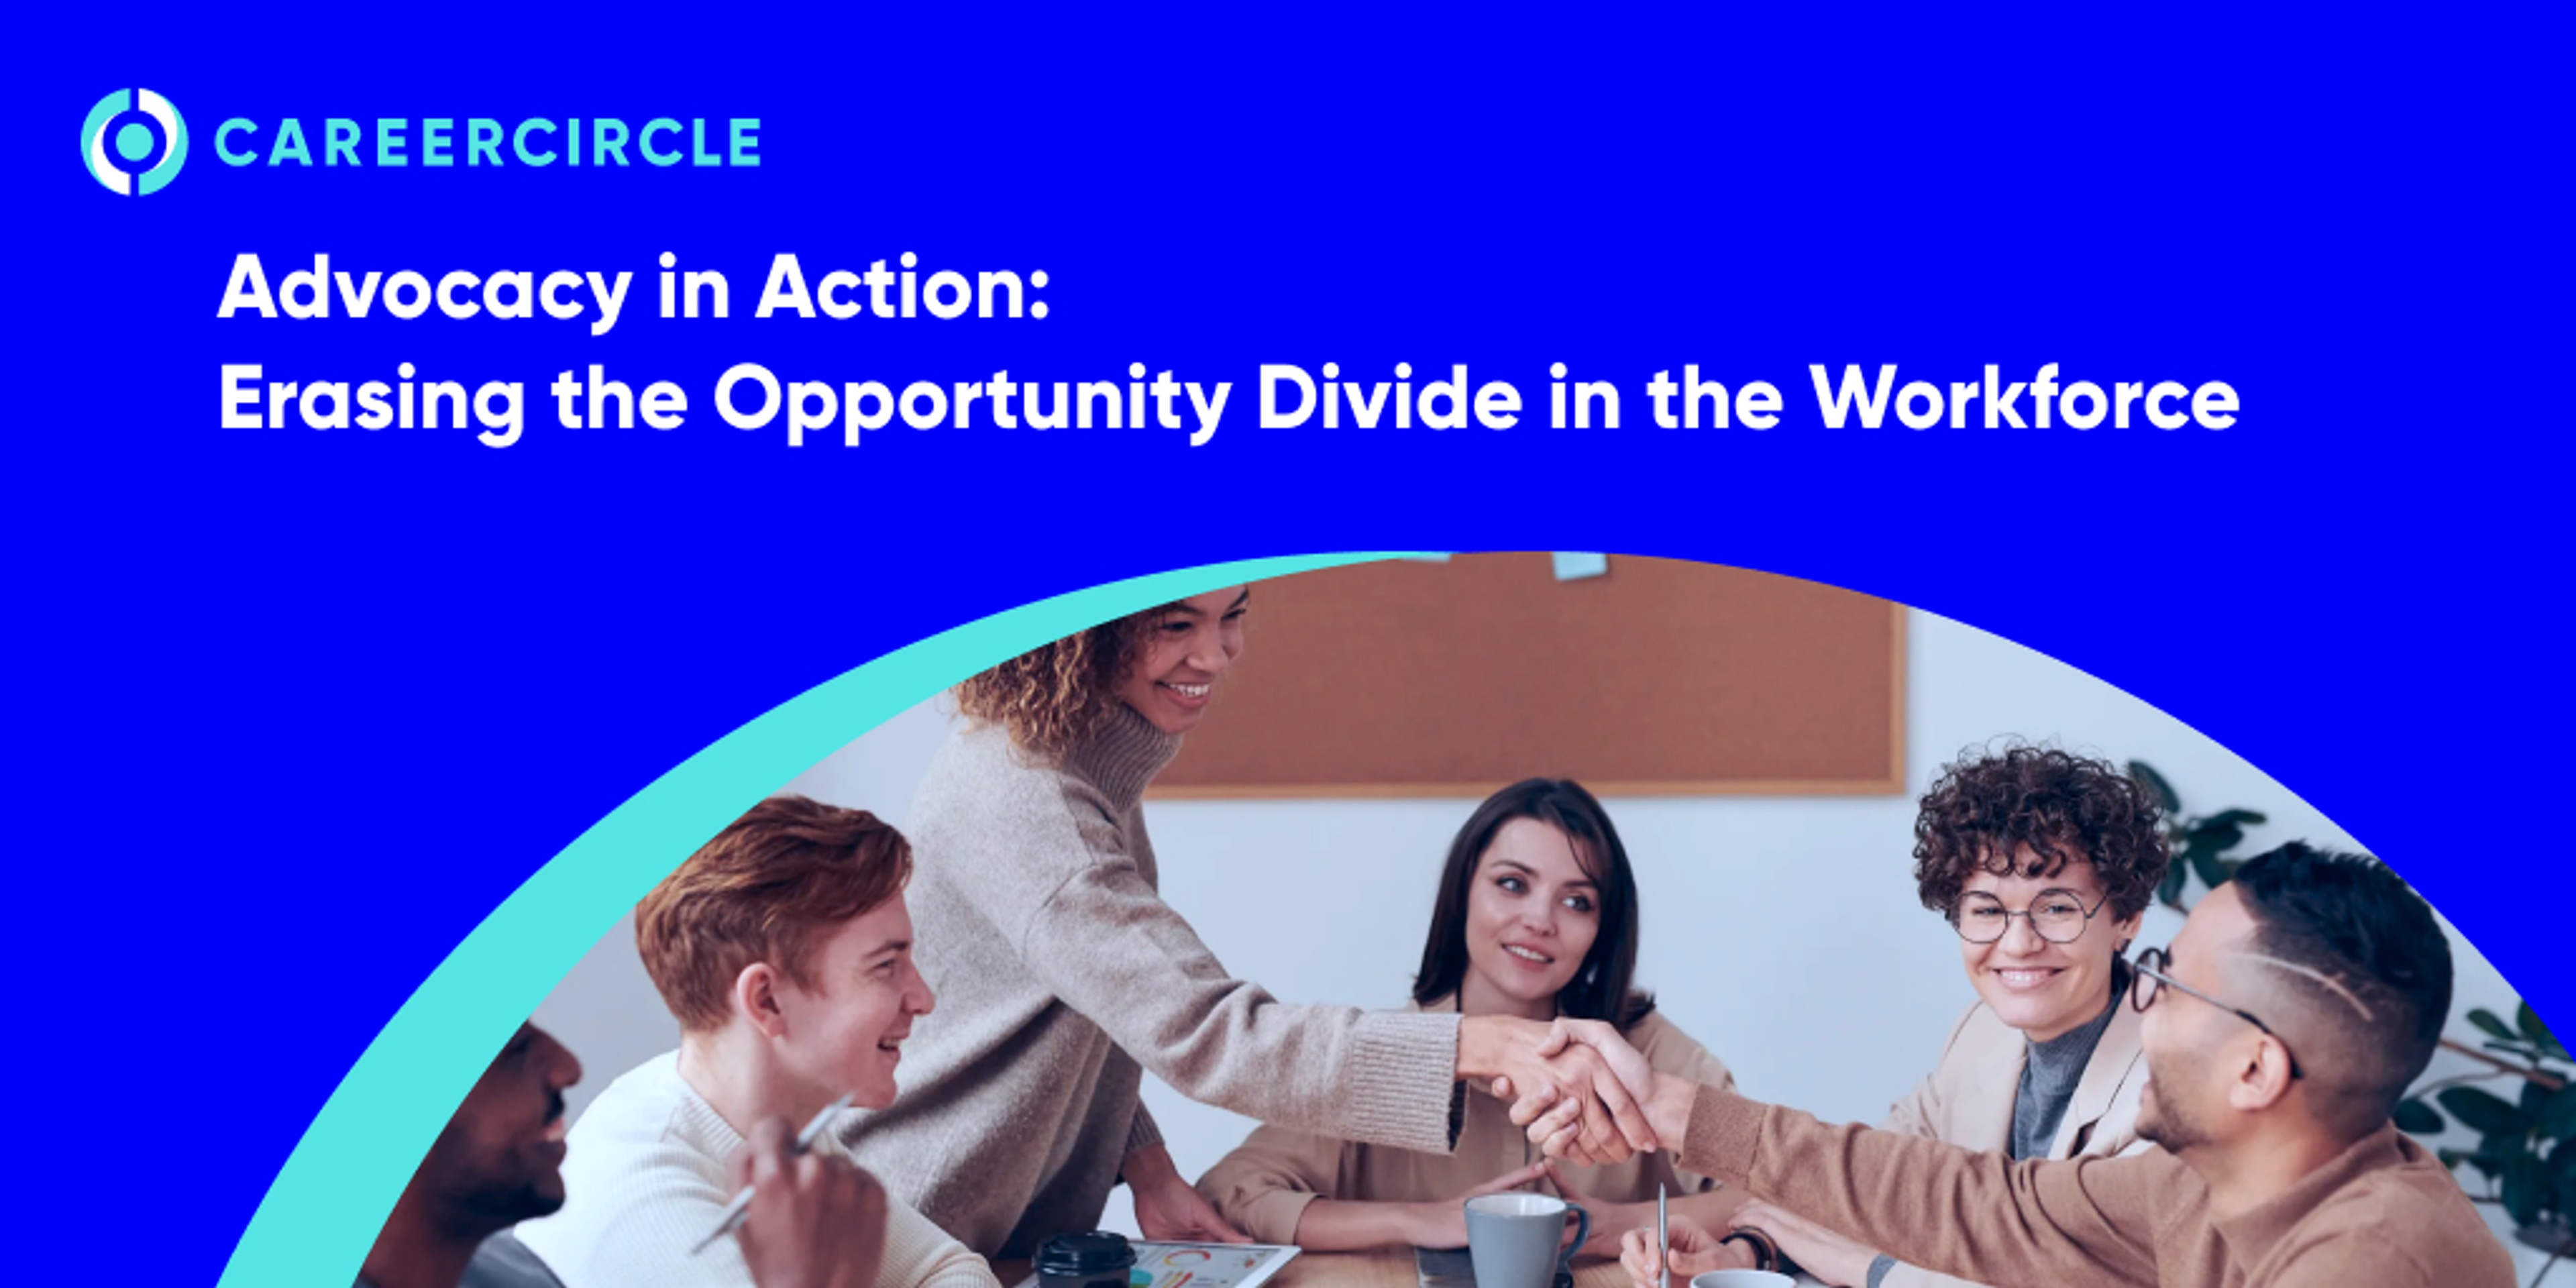 CareerCircle - "Advocacy in Action: Erasing the Opportunity Divide in the Workforce" with an image of people gathered at a table and shaking hands.